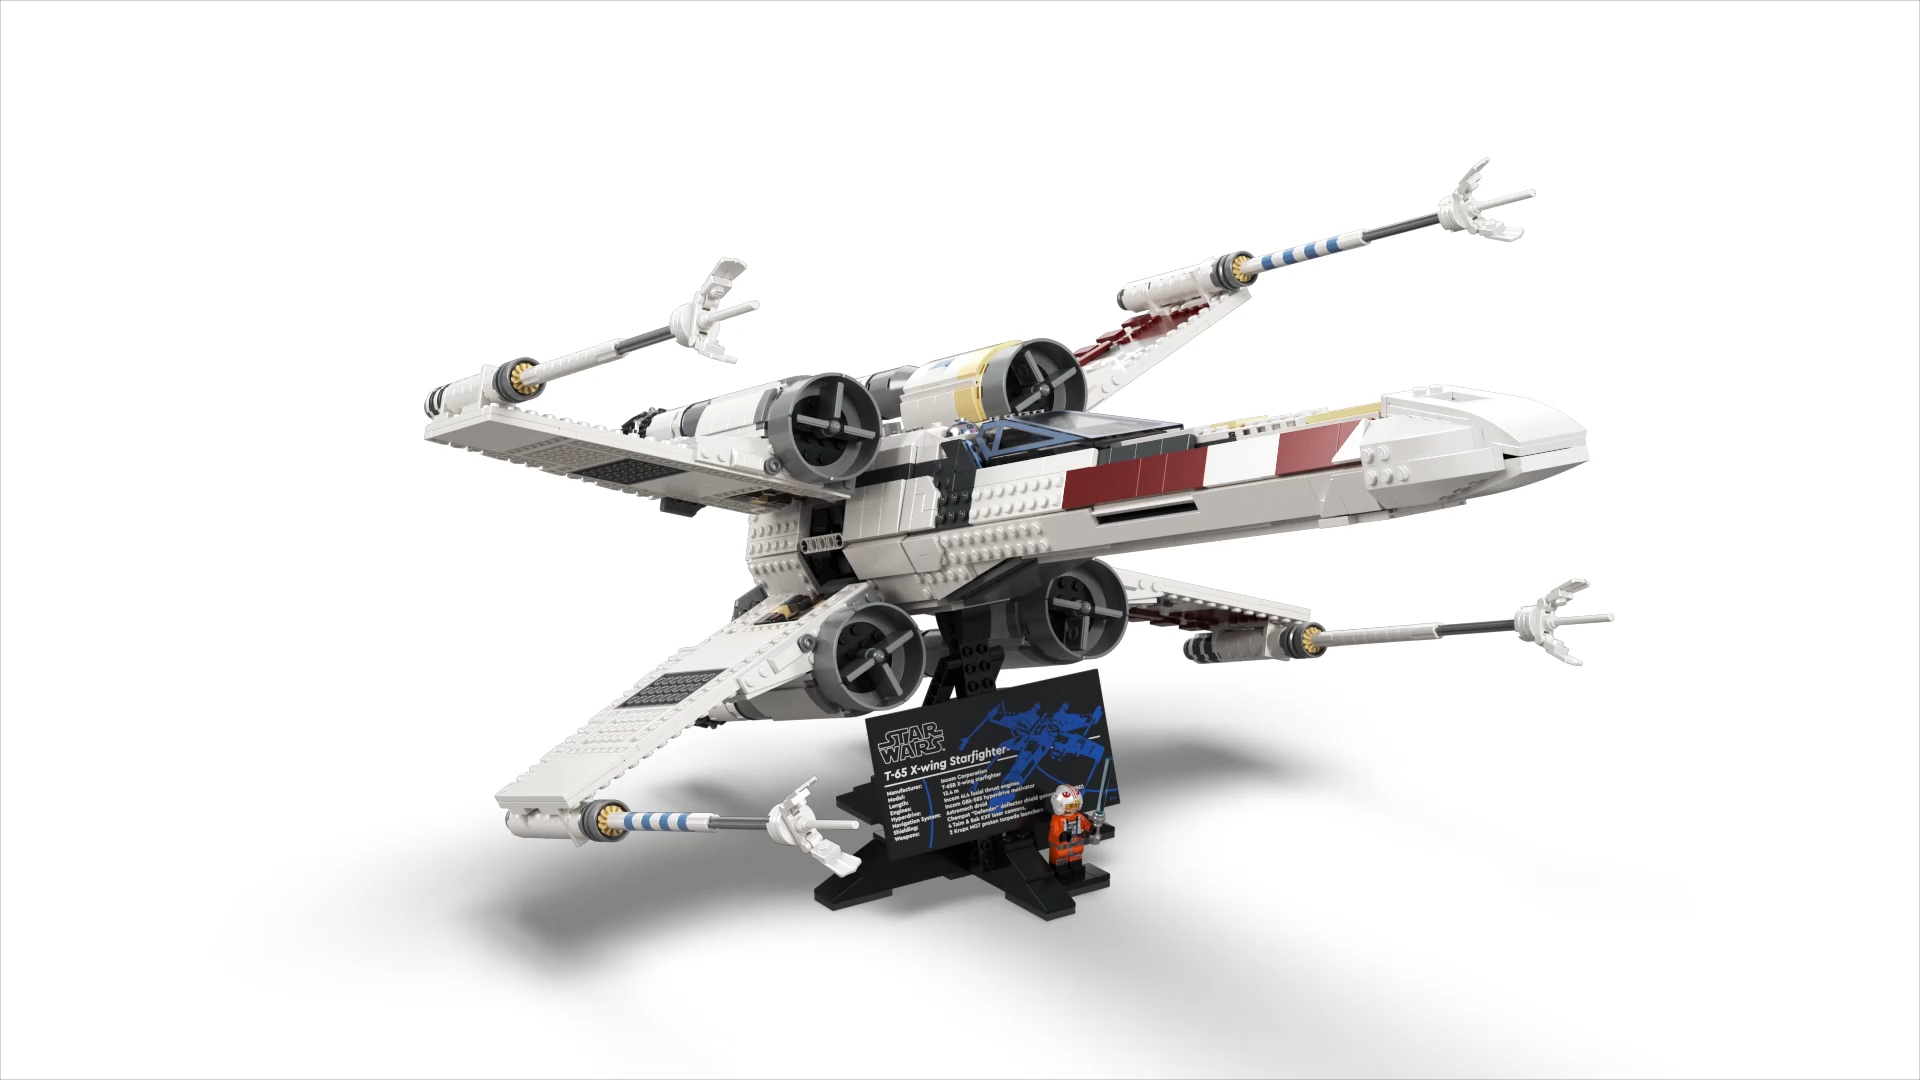 Patent dø Pligt Lego announces Star Wars Ultimate Collector Series X-wing Starfighter